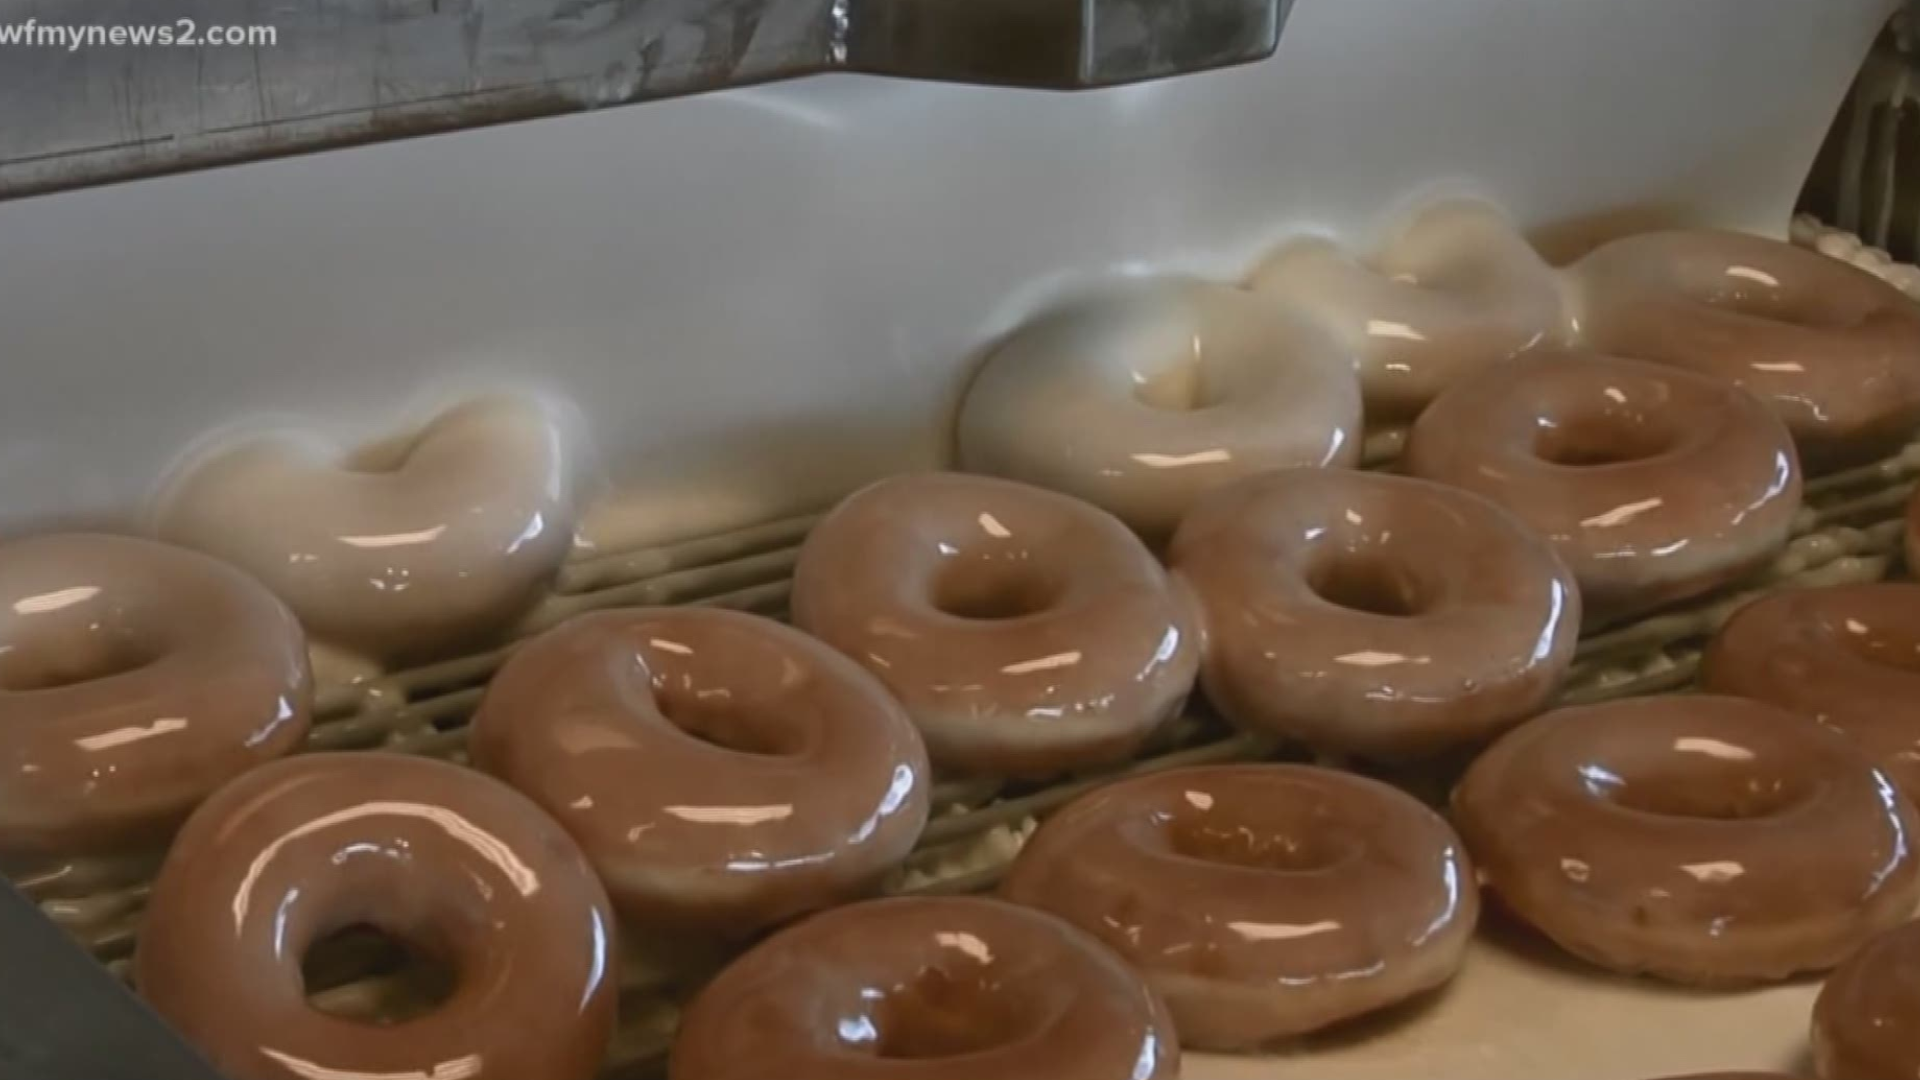 Triad institution Krispy Kreme can now deliver its famous glazed doughnuts to your door.